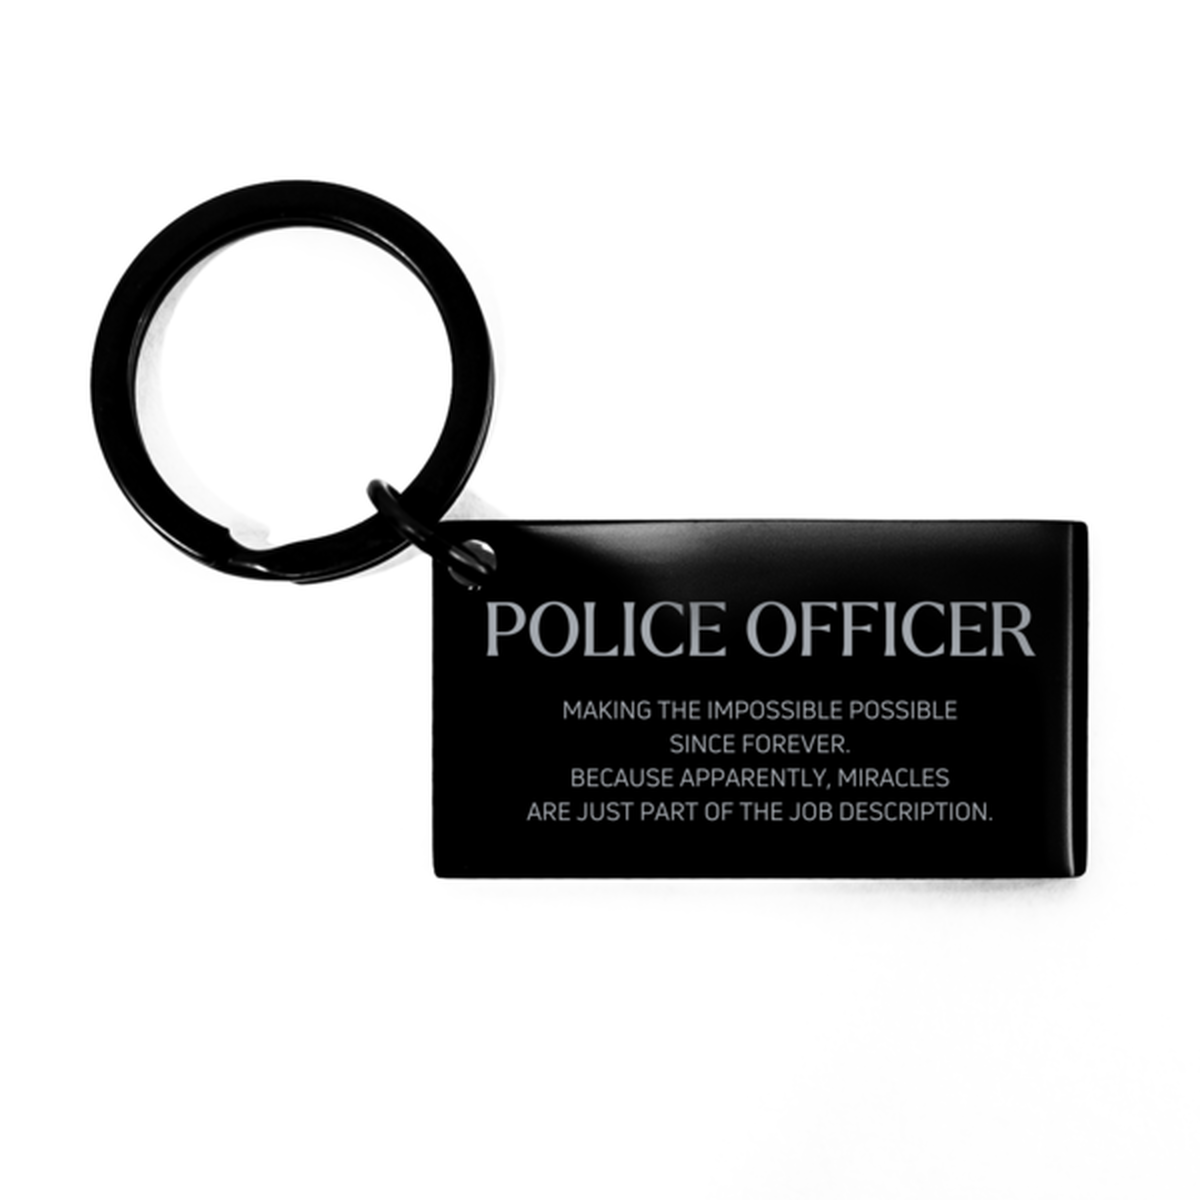 Funny Police Officer Gifts, Miracles are just part of the job description, Inspirational Birthday Keychain For Police Officer, Men, Women, Coworkers, Friends, Boss